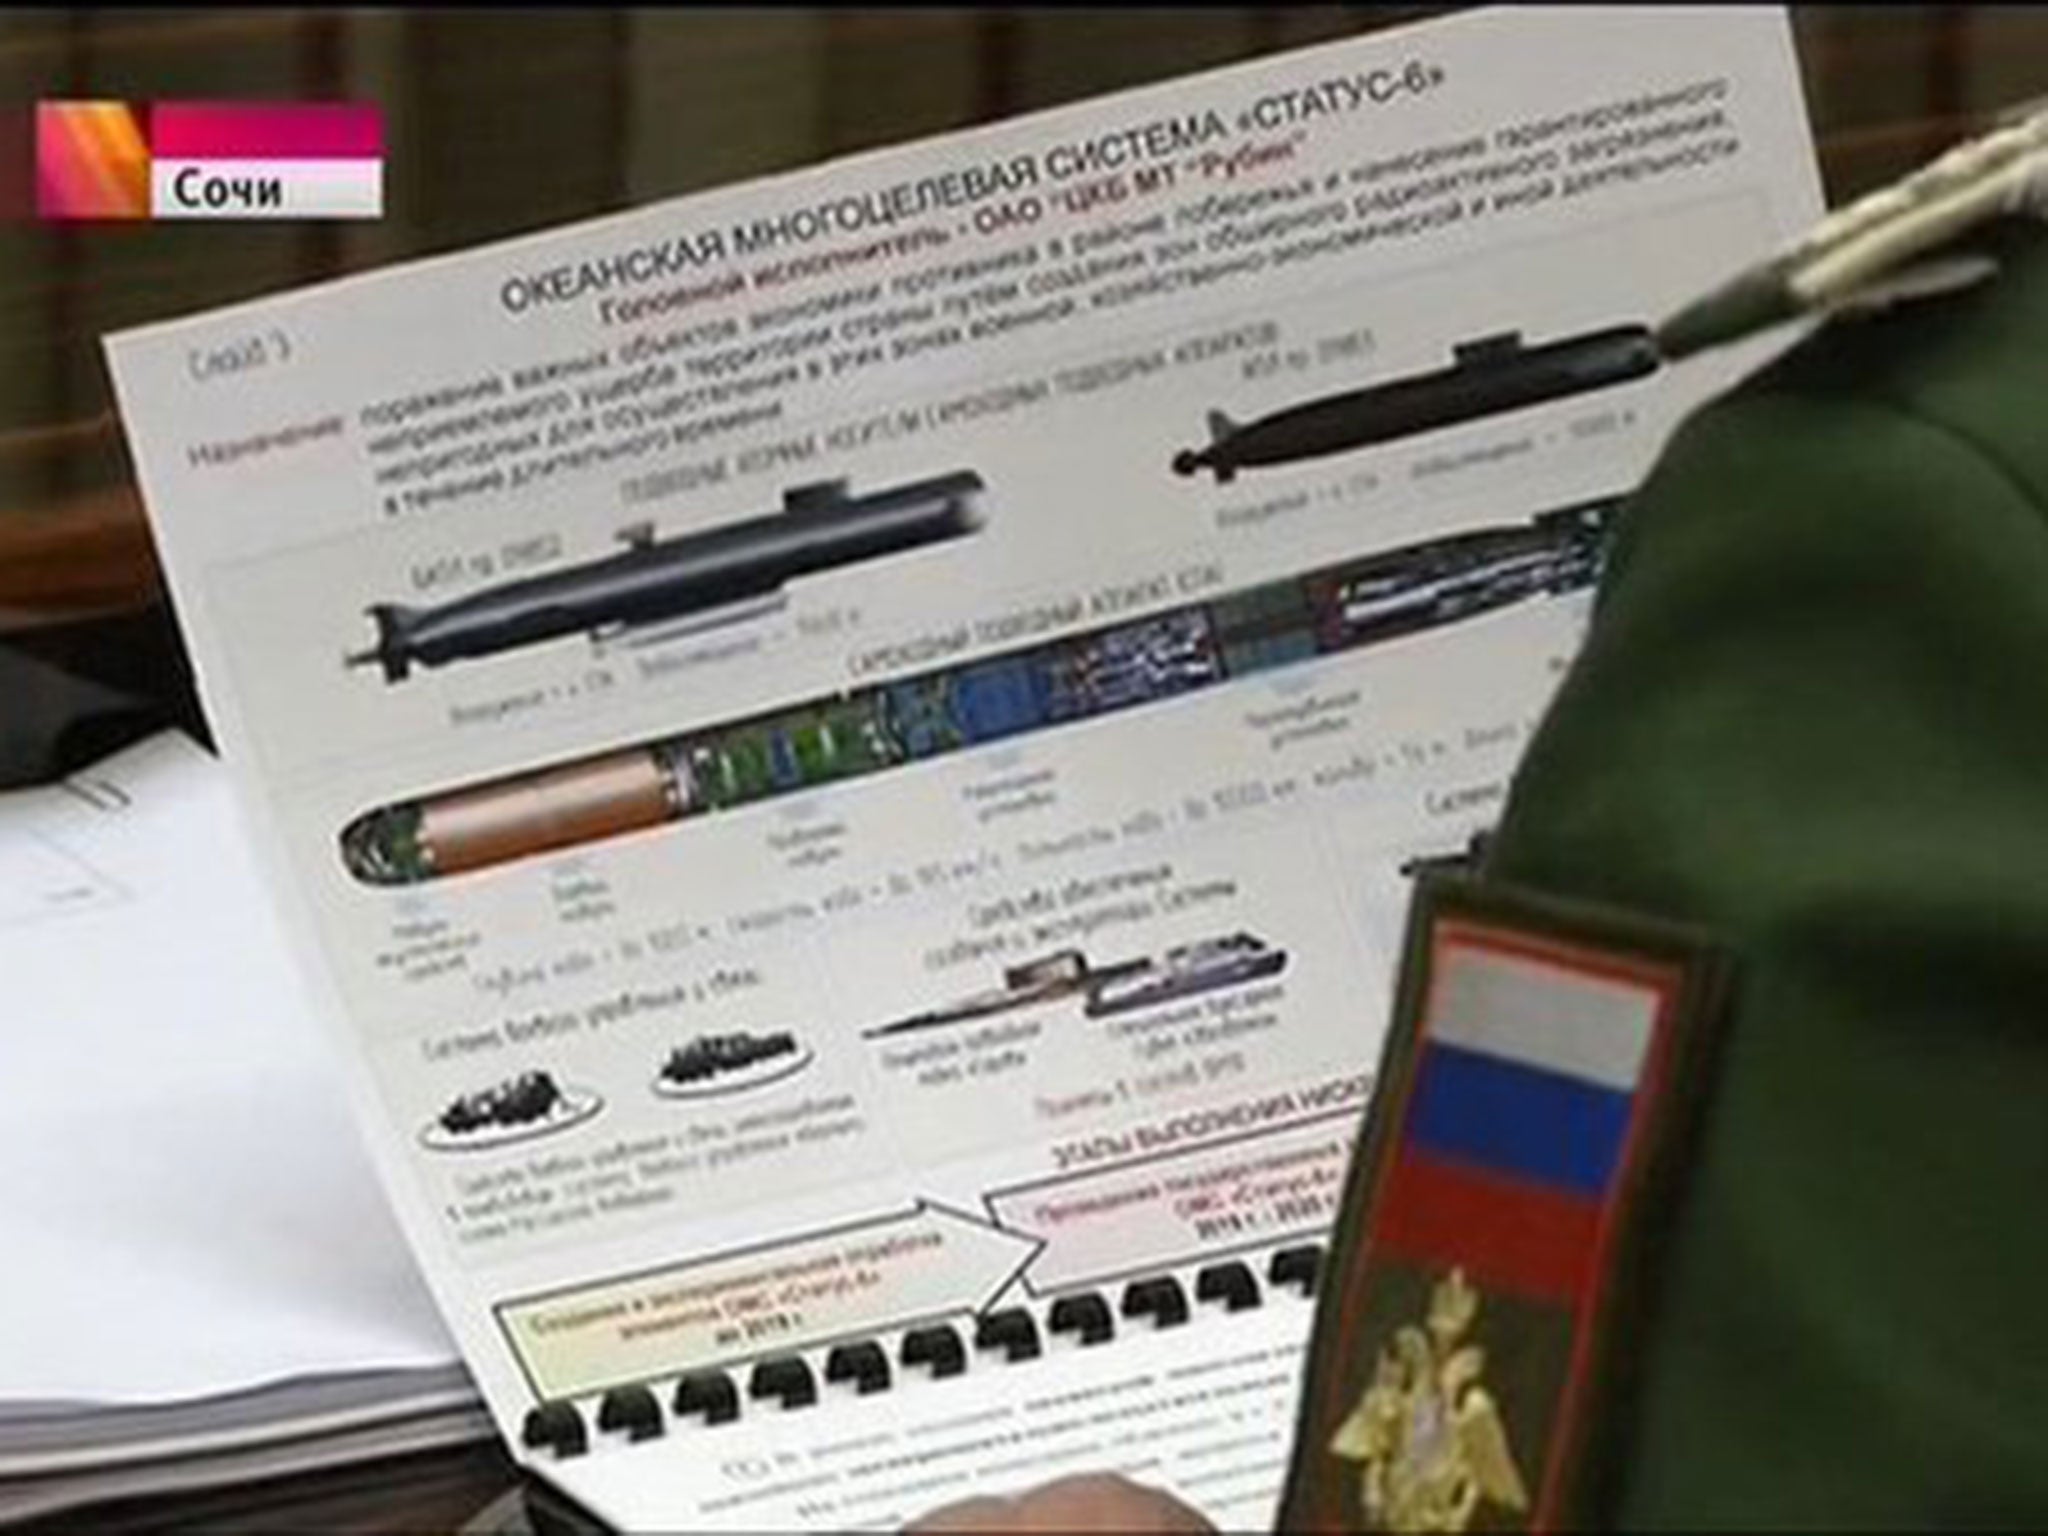 Secret plans for the nuclear torpedo system could be seen in Russian television footage